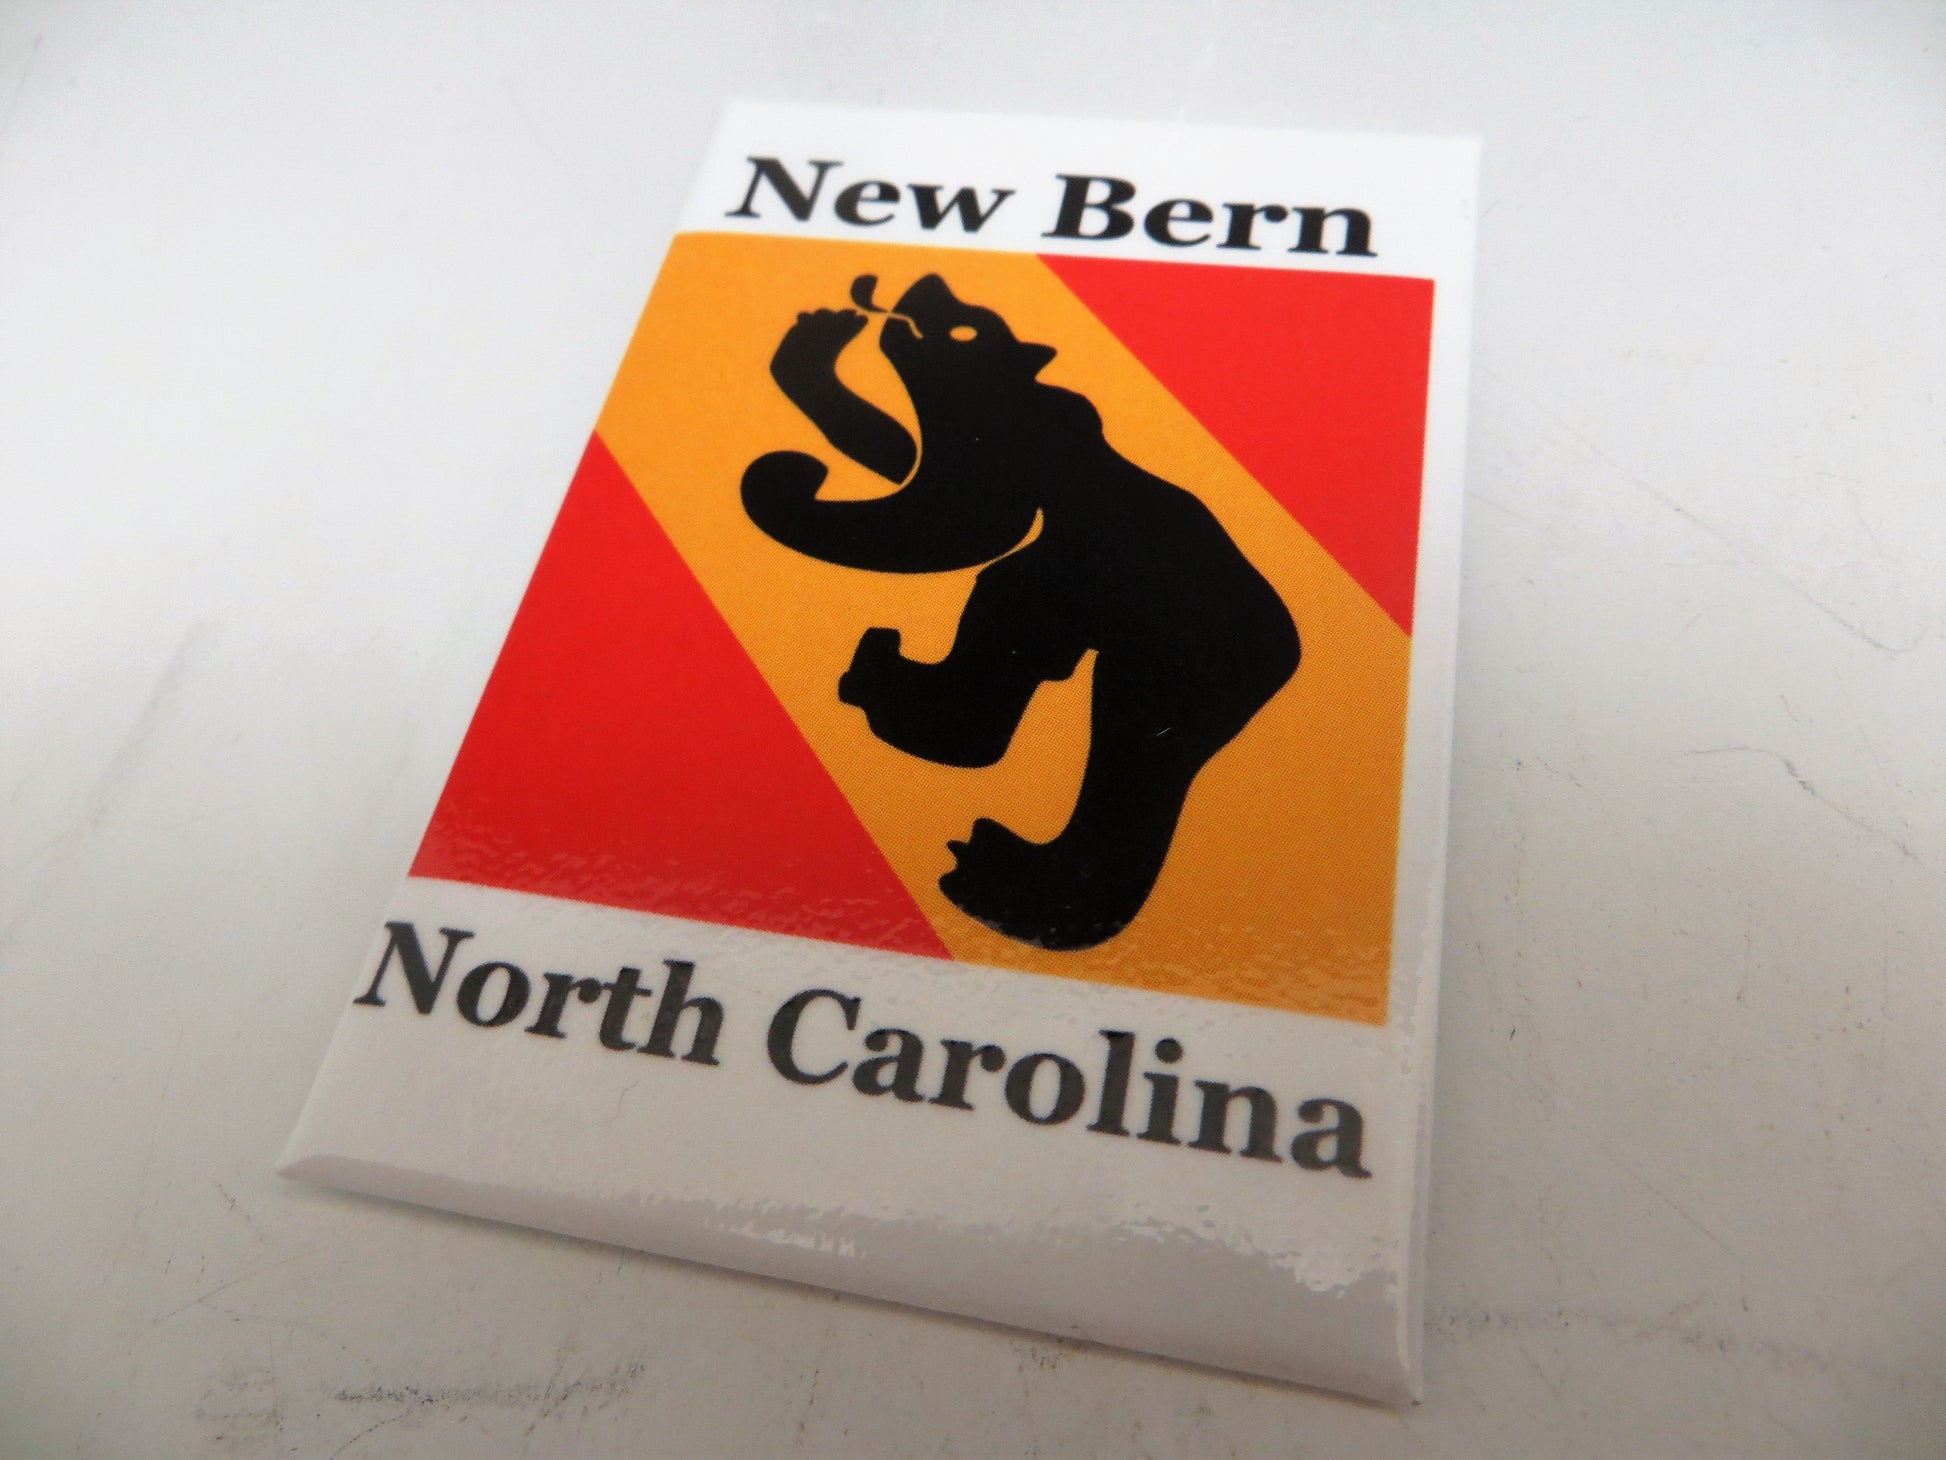 New Bern Magnet🎨 Gifts🎨 Buy Art at Carolina Creations Gallery in Downtown New Bern🎨